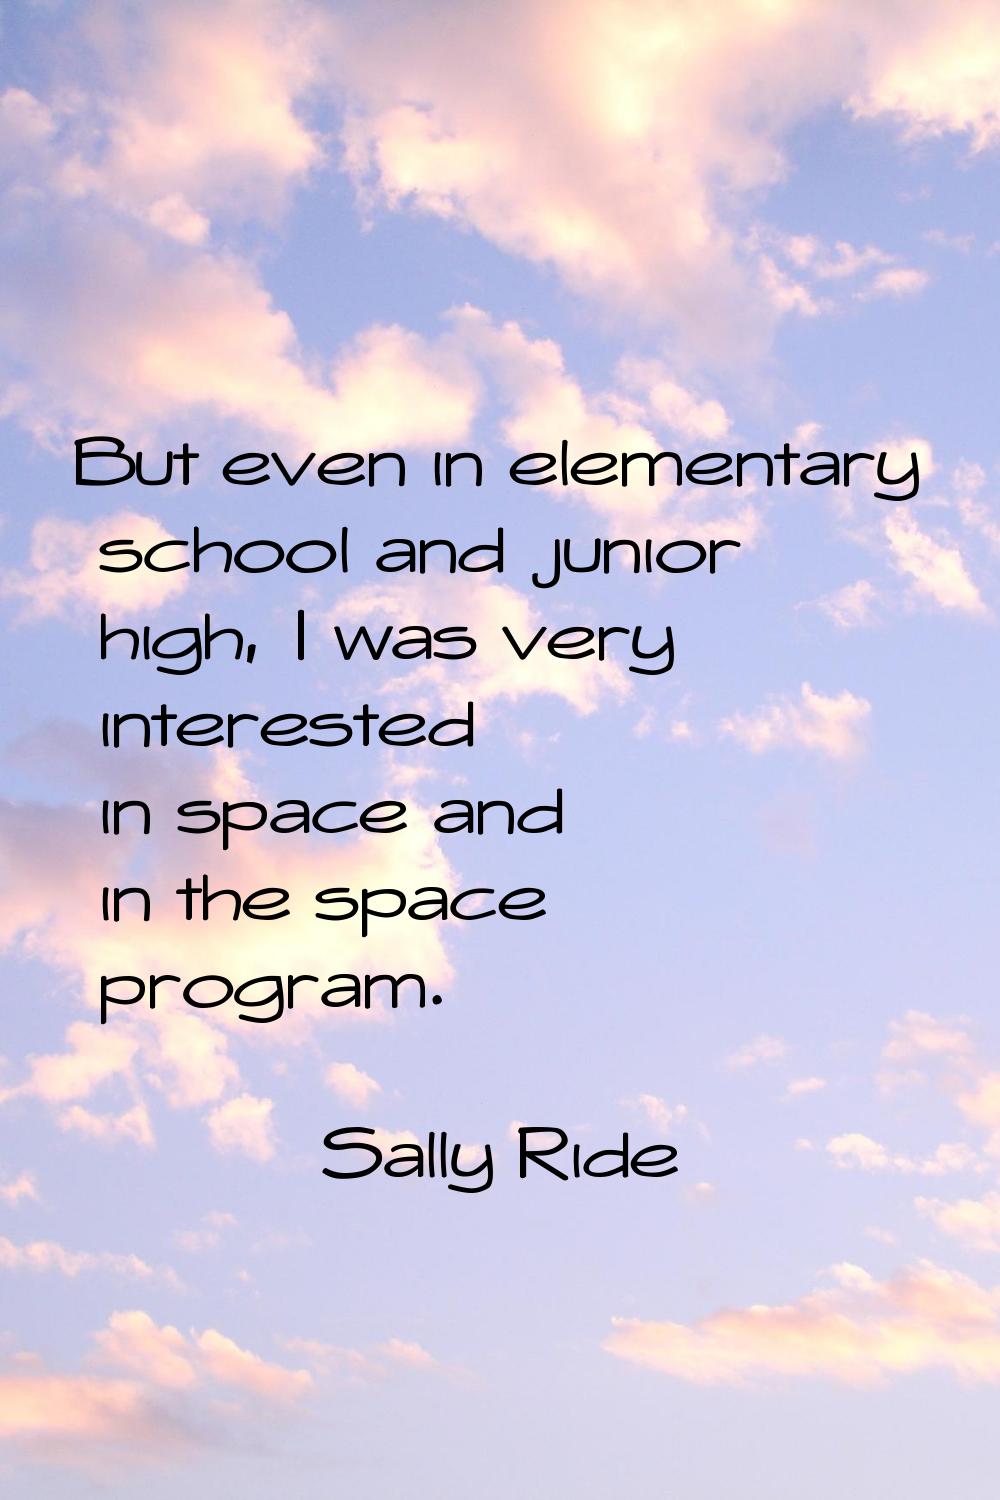 But even in elementary school and junior high, I was very interested in space and in the space prog